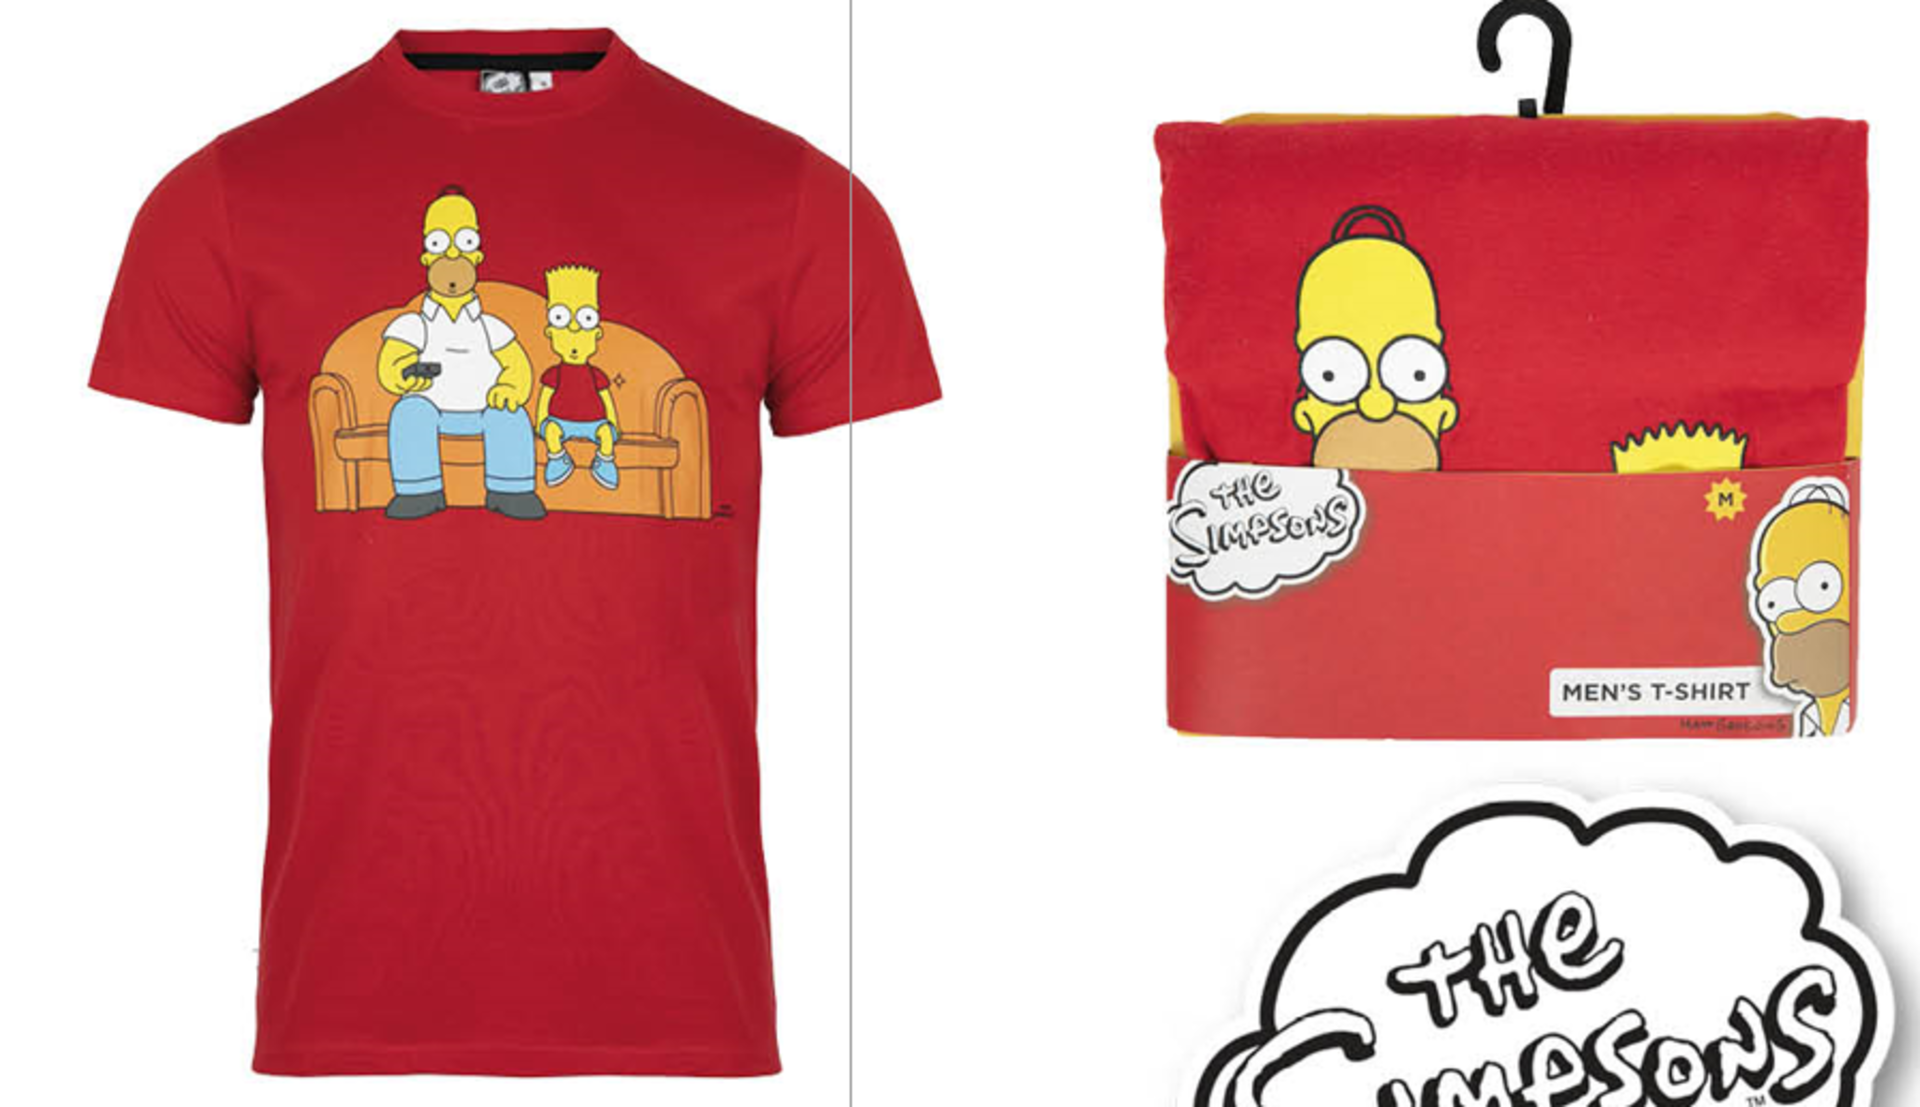 24 x New & Packaged Official Licenced The Simpsons Homer T-Shirts. In 2 Colours. 5 assorted sizes. - Image 2 of 2